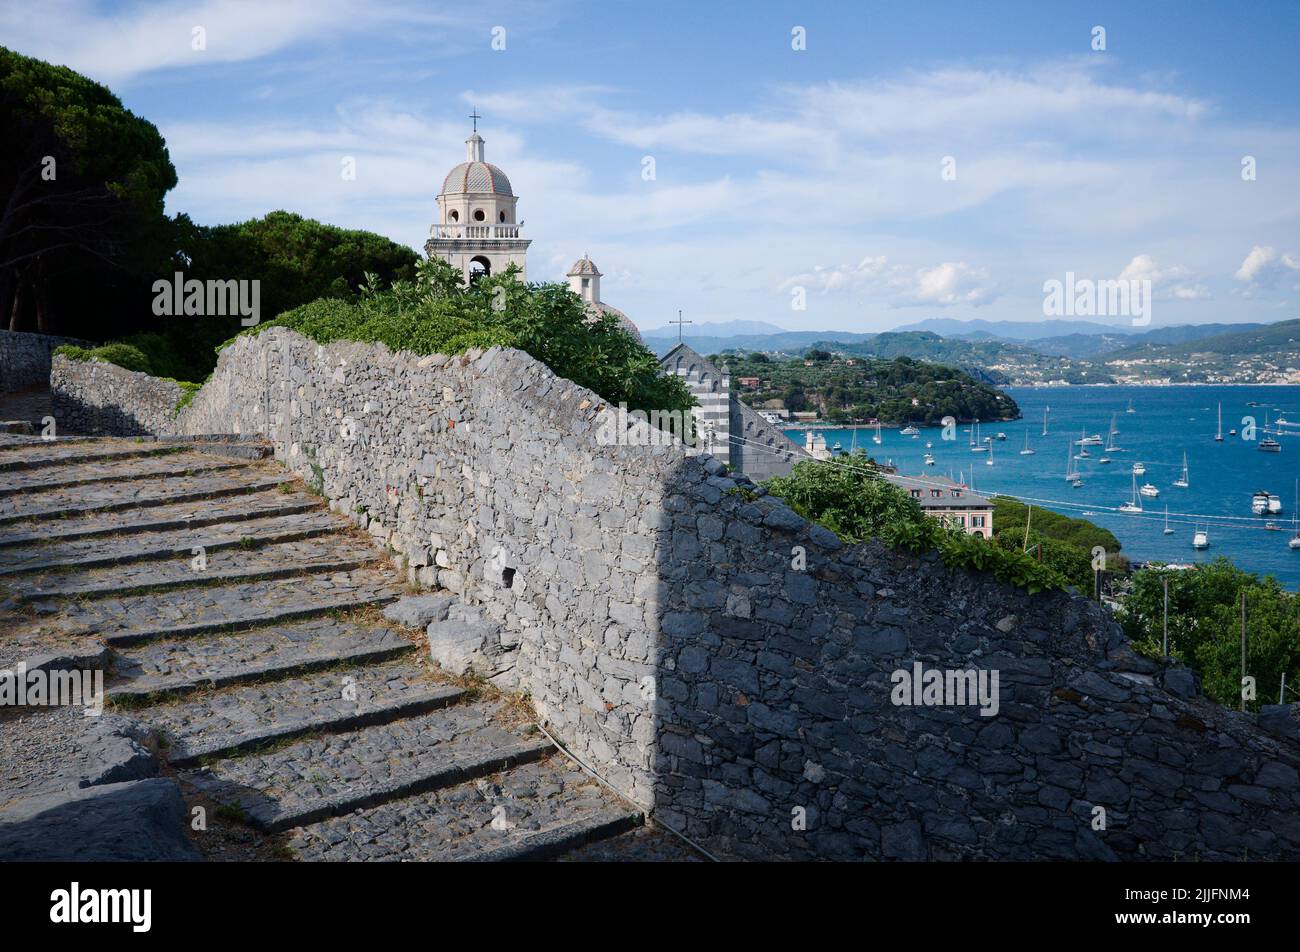 Panoramic view to bay with many yachts from stone steps and remains of medieval stone wall in Porto Venere, Italy. Dome of San Lorenzo church Stock Photo